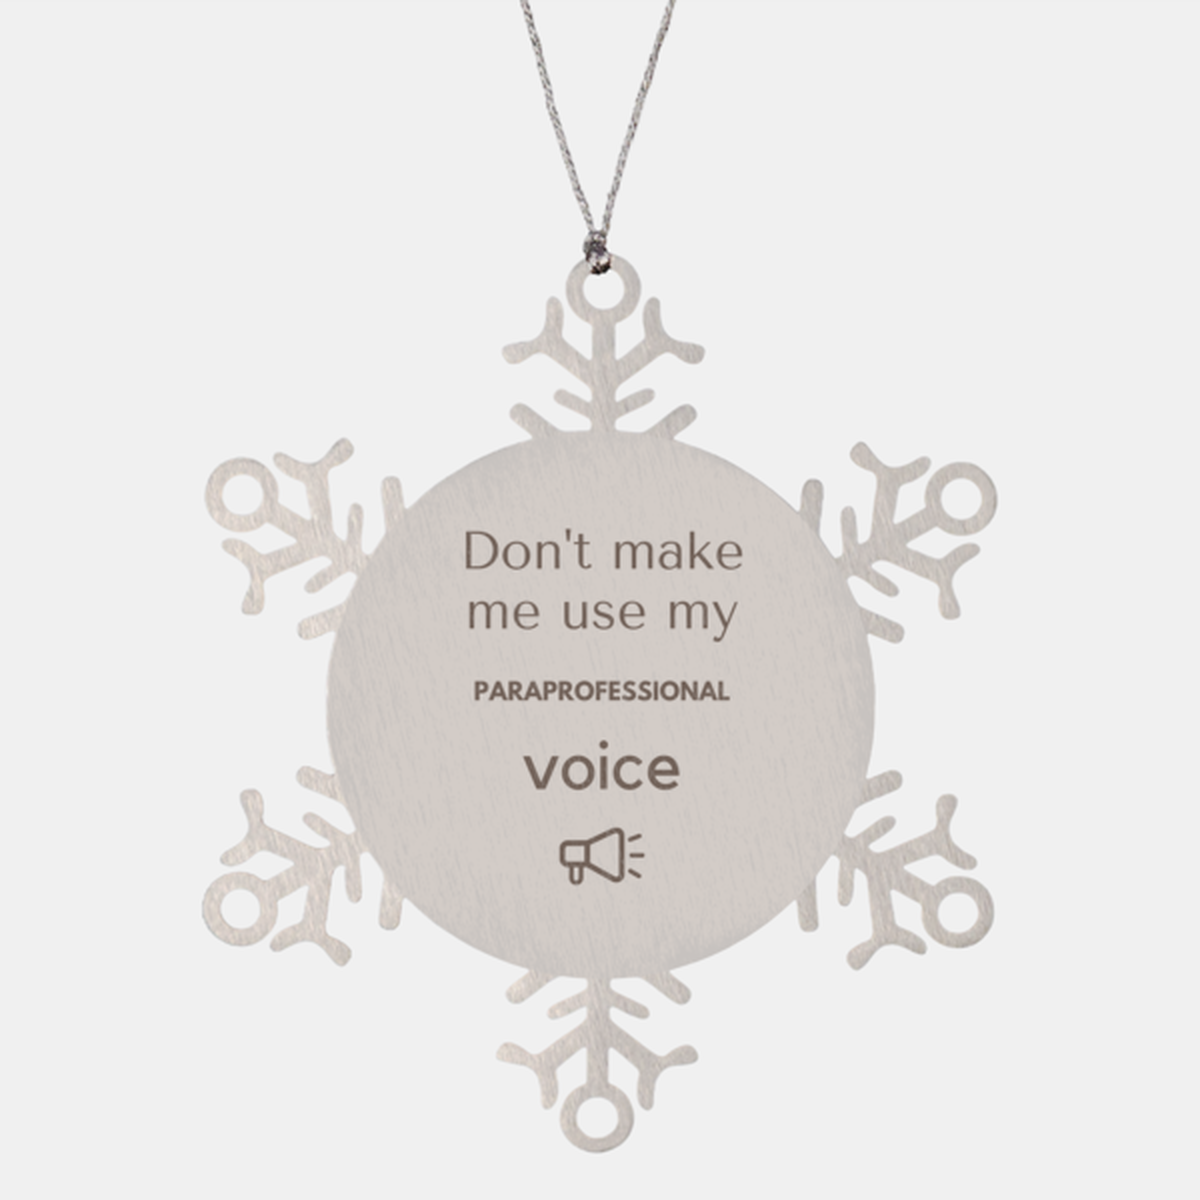 Don't make me use my Paraprofessional voice, Sarcasm Paraprofessional Ornament Gifts, Christmas Paraprofessional Snowflake Ornament Unique Gifts For Paraprofessional Coworkers, Men, Women, Colleague, Friends